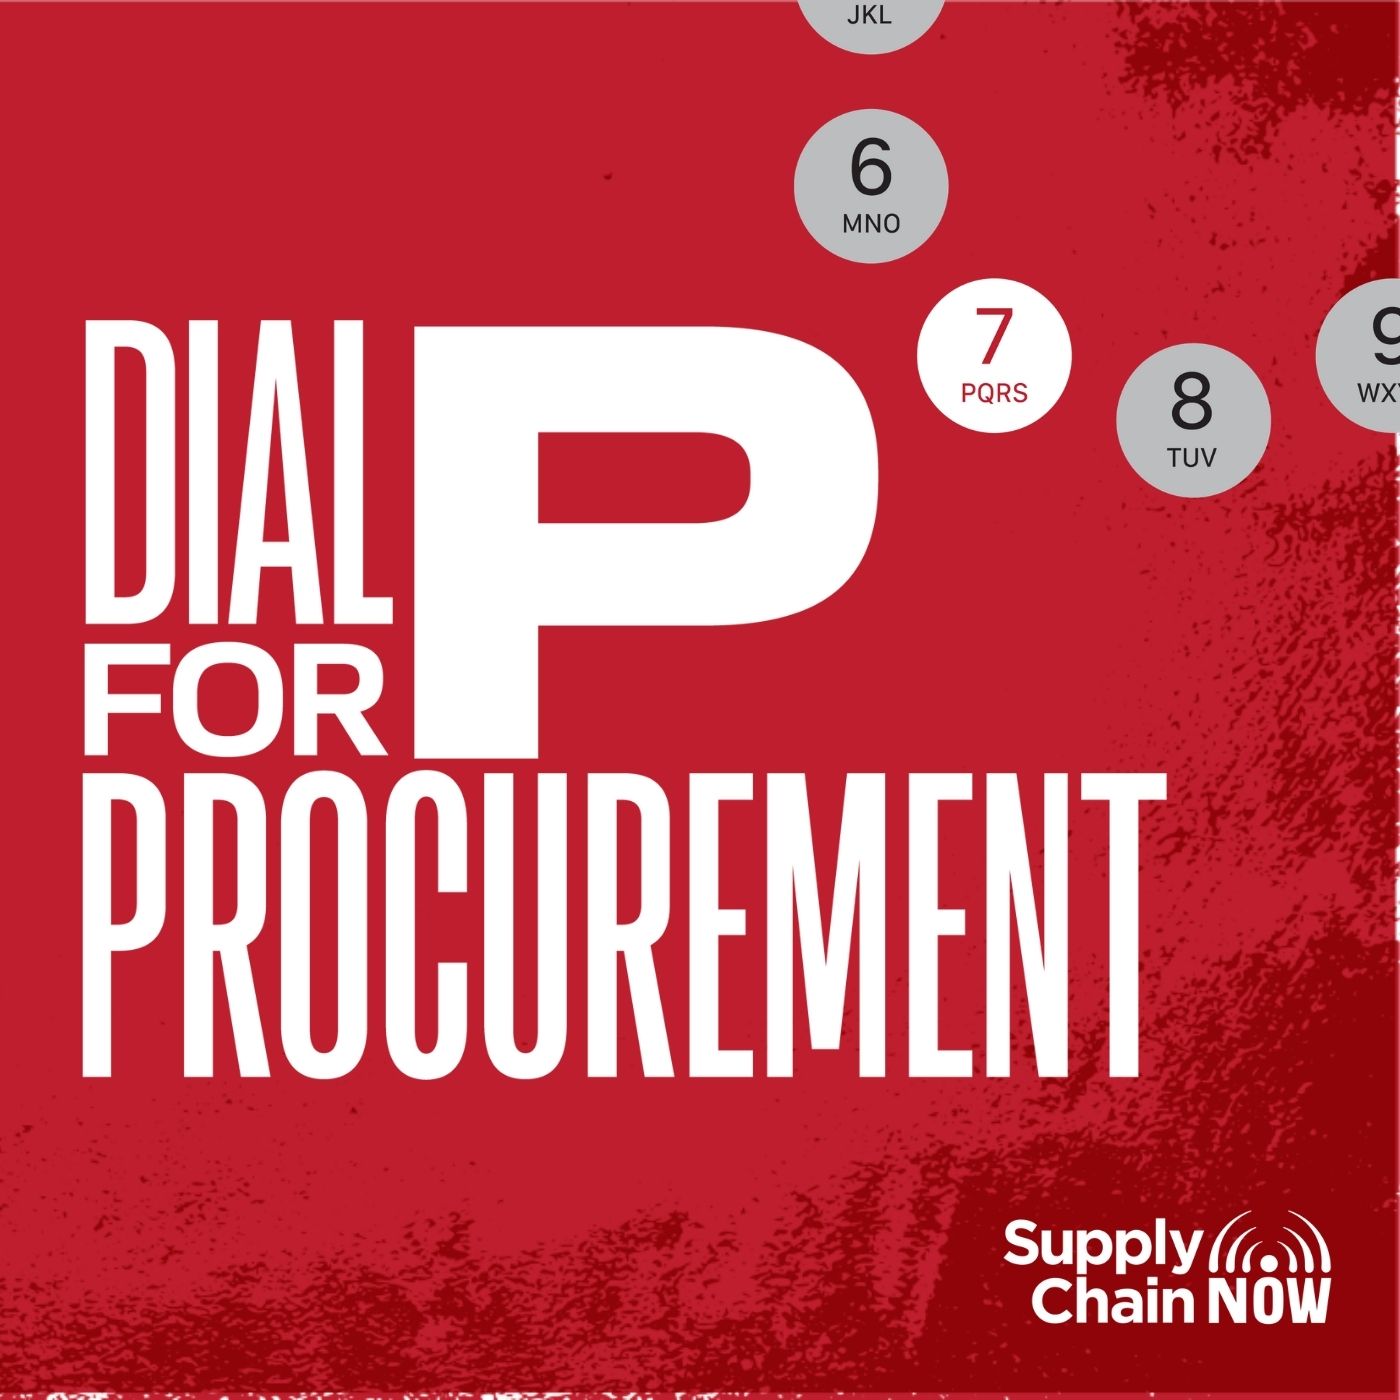 Artwork for podcast Dial P for Procurement